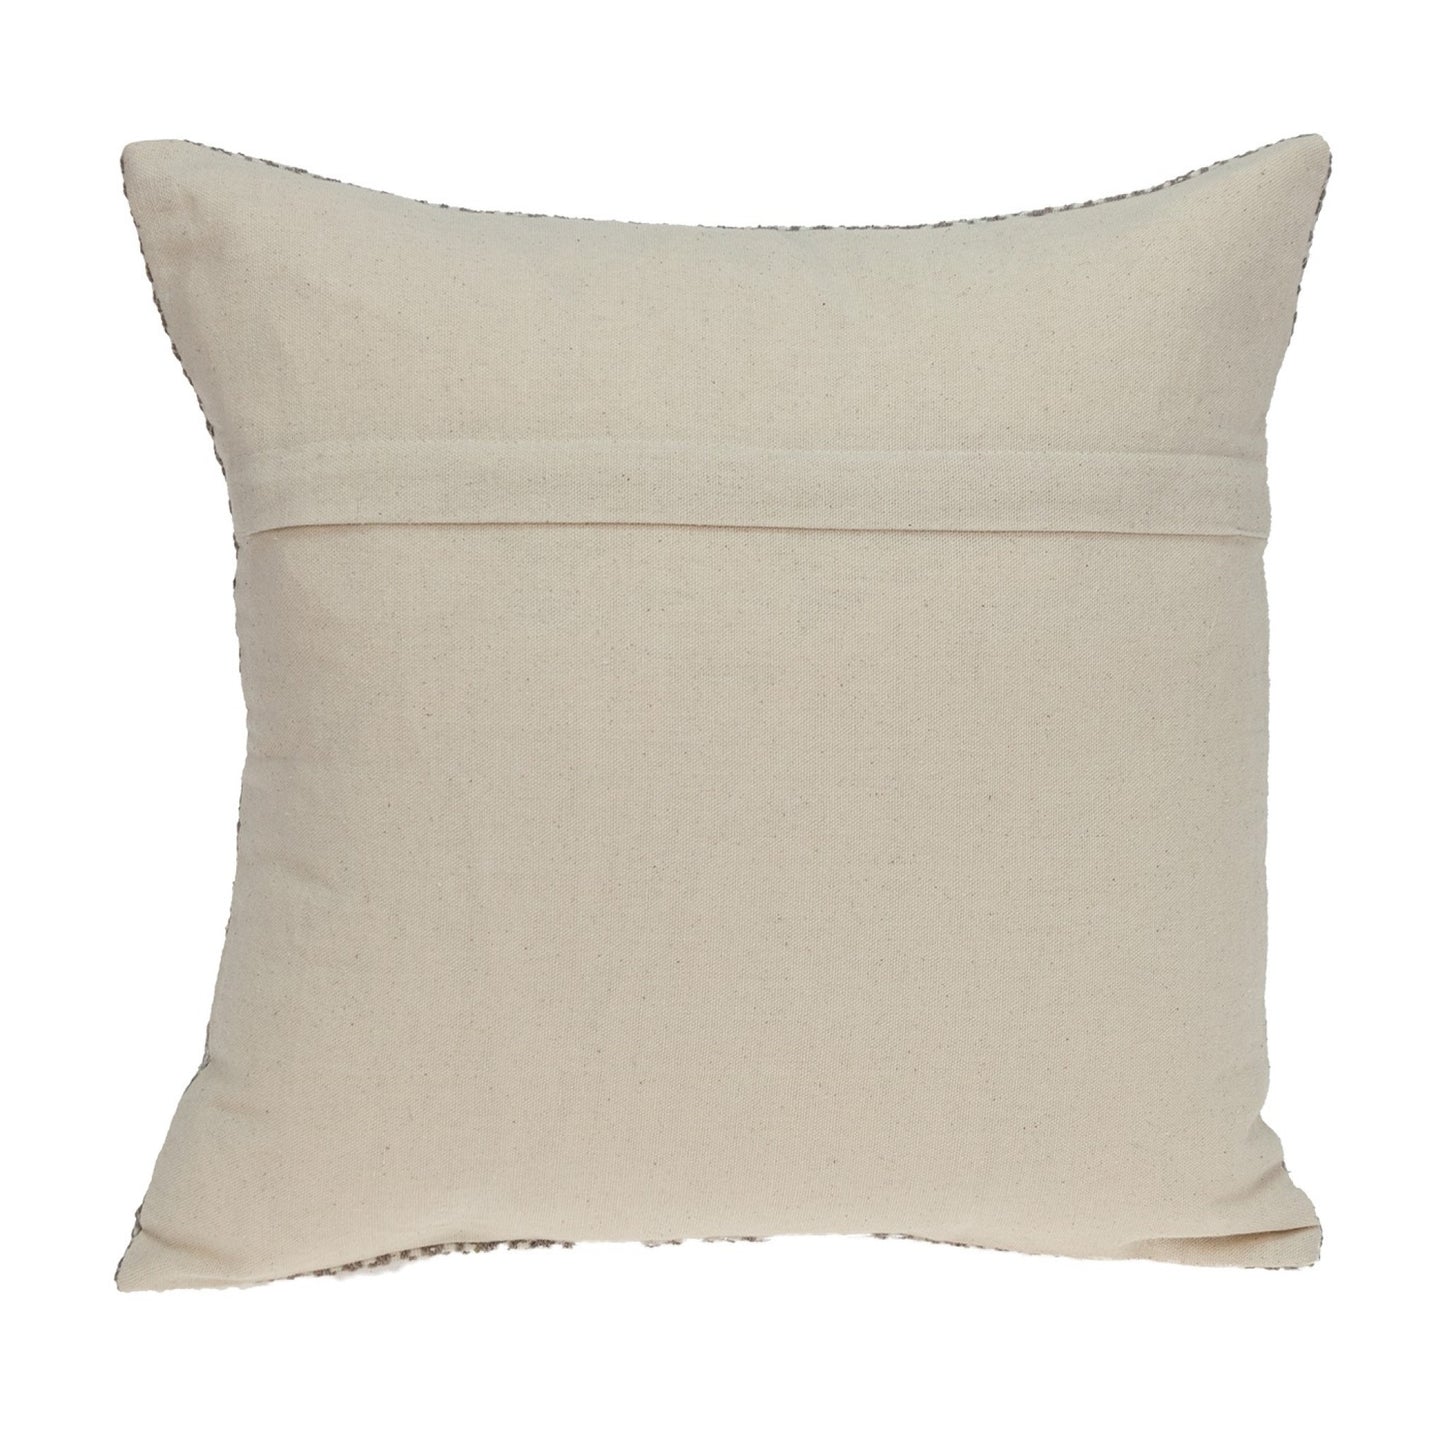 Beige And Mocha Throw Pillow